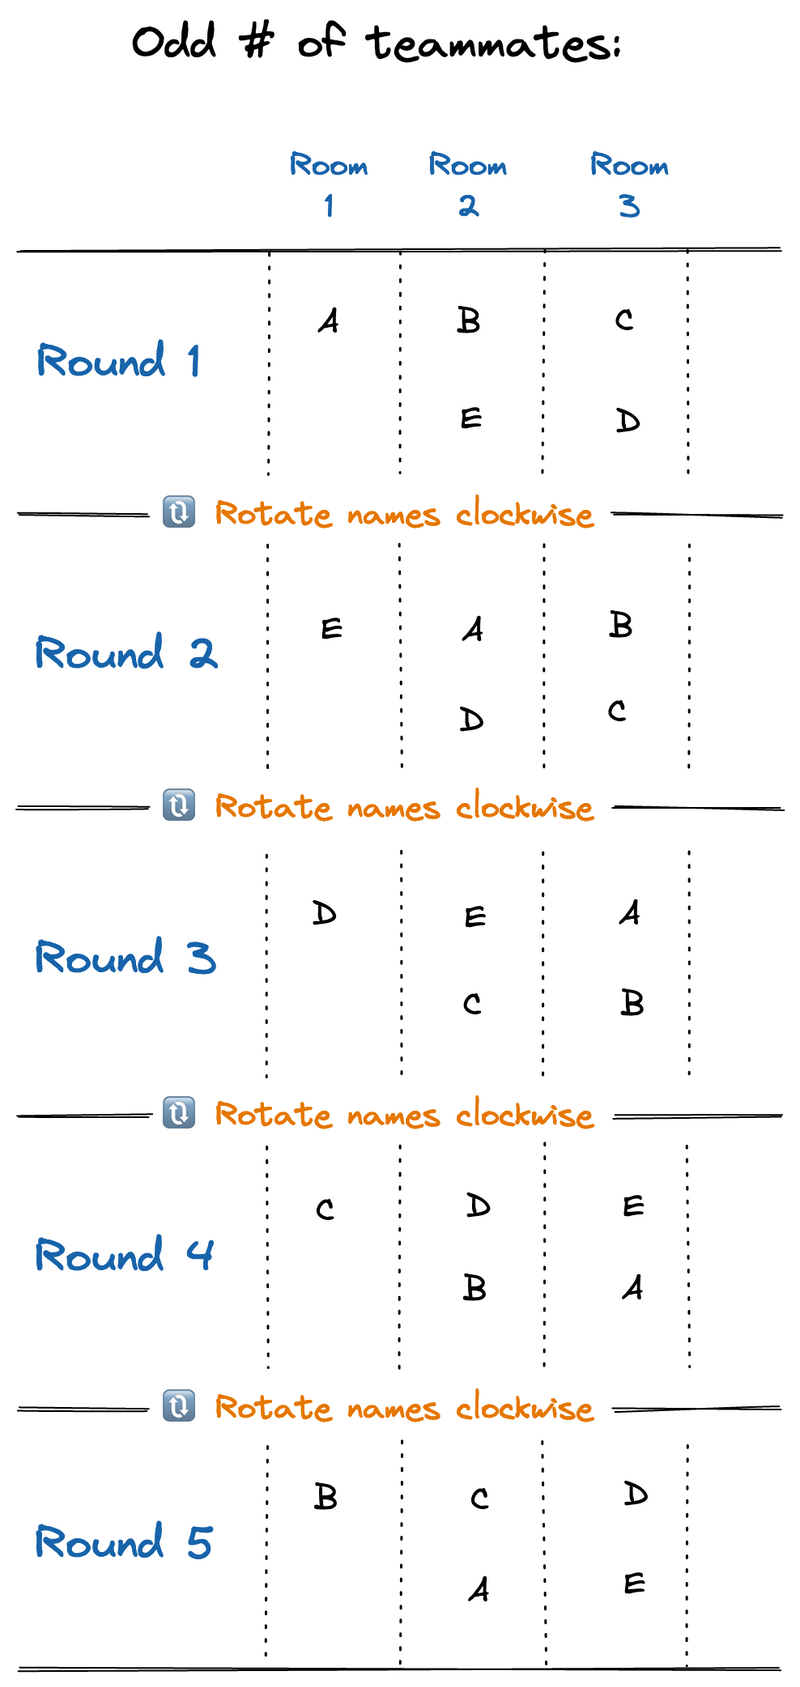 A diagram showing the pair rotations for a team of 5. Detailed description below.